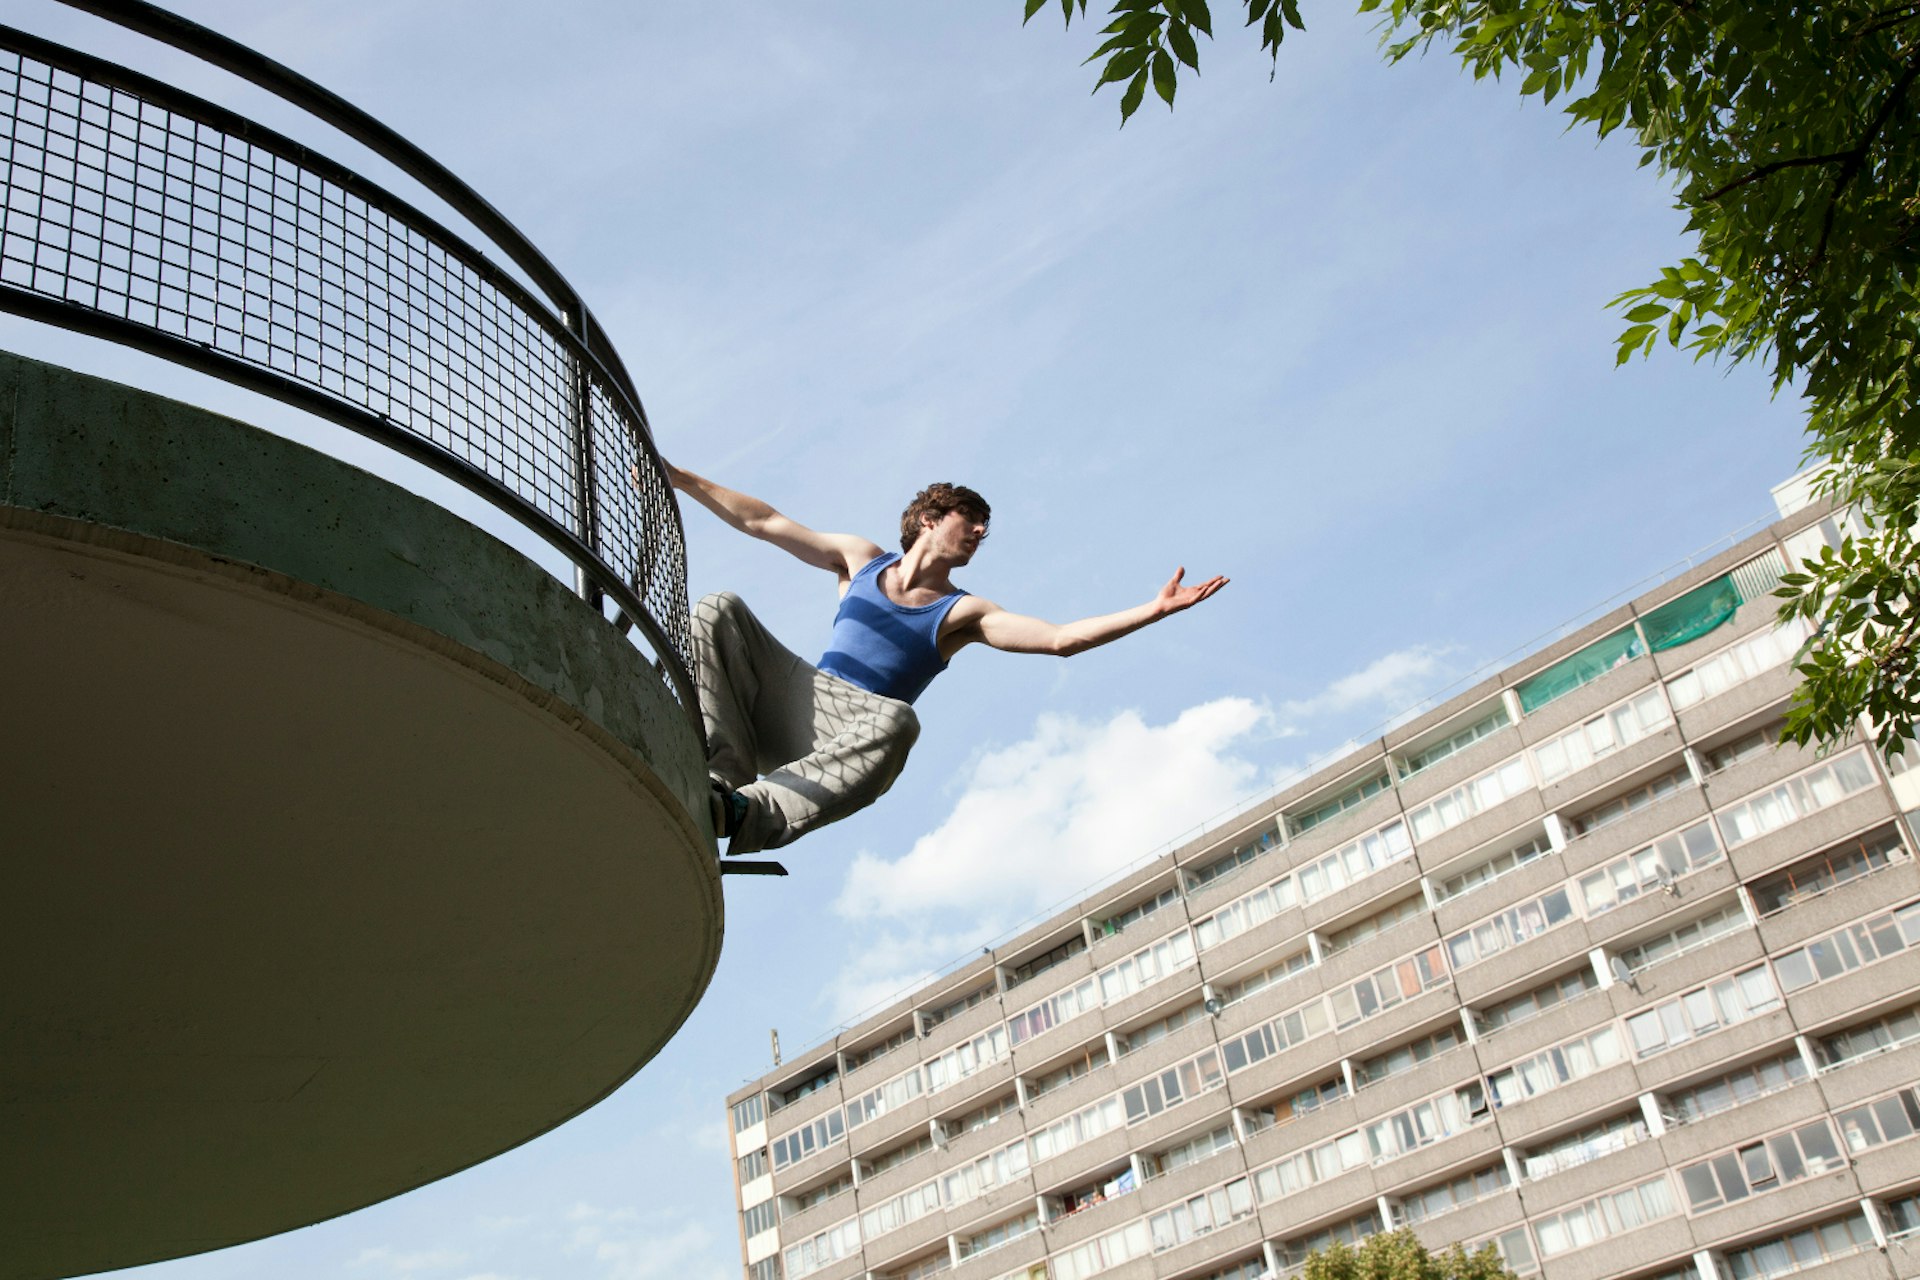 Free running on the South Bank. Image by Cultura RM Exclusive / Chris Whitehead / Getty